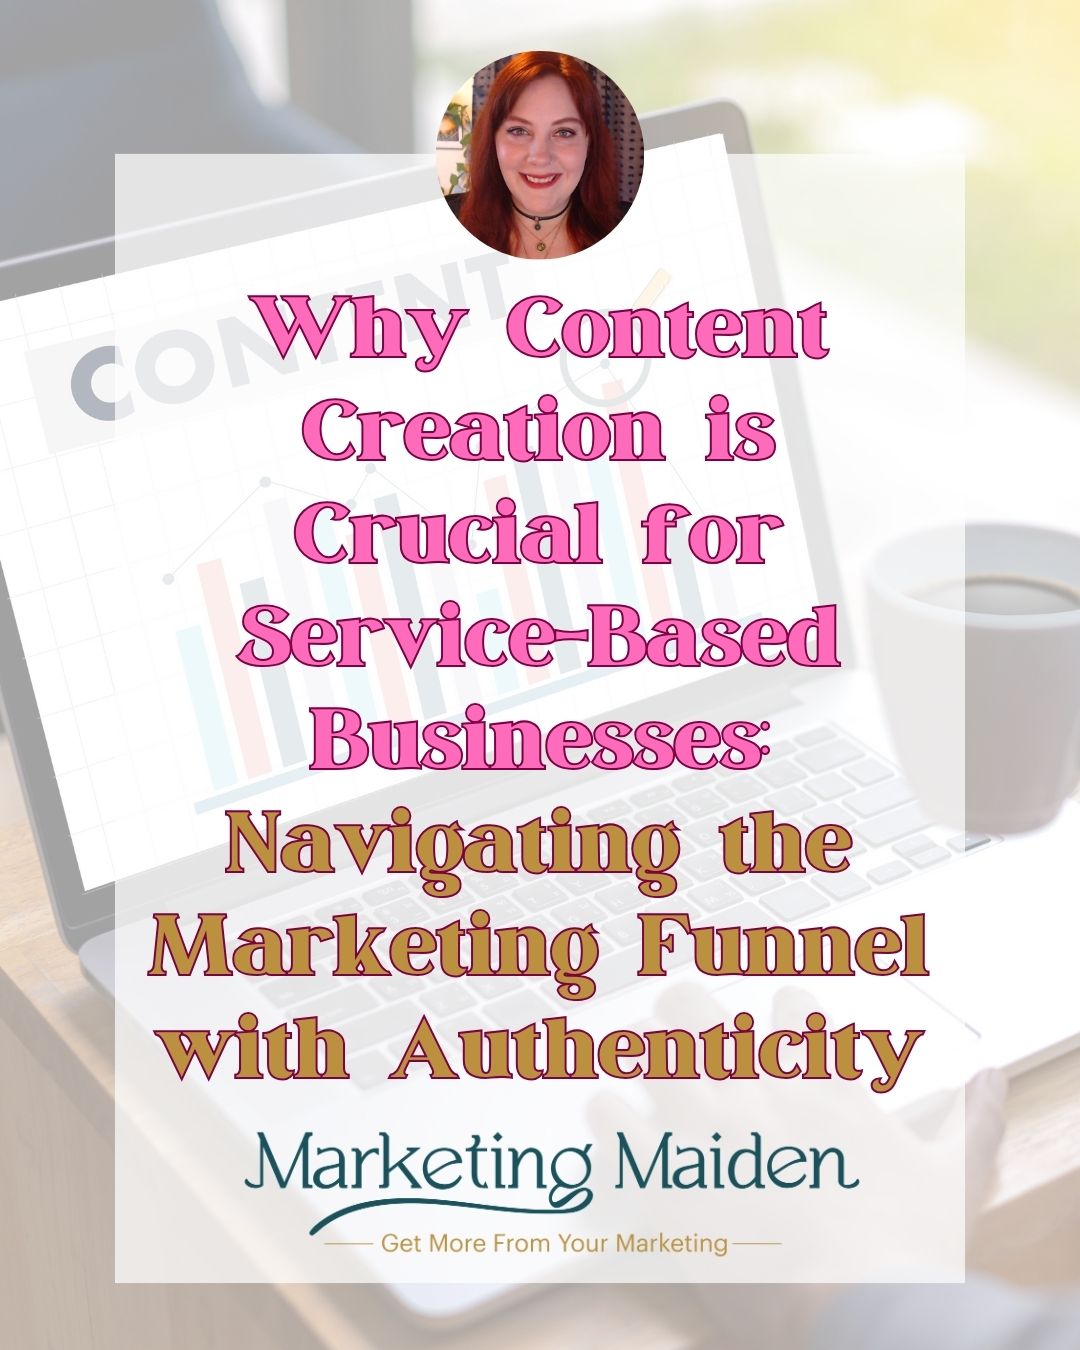 Why Content Creation is Crucial for Service-Based Businesses: Navigating the Marketing Funnel with Authenticity